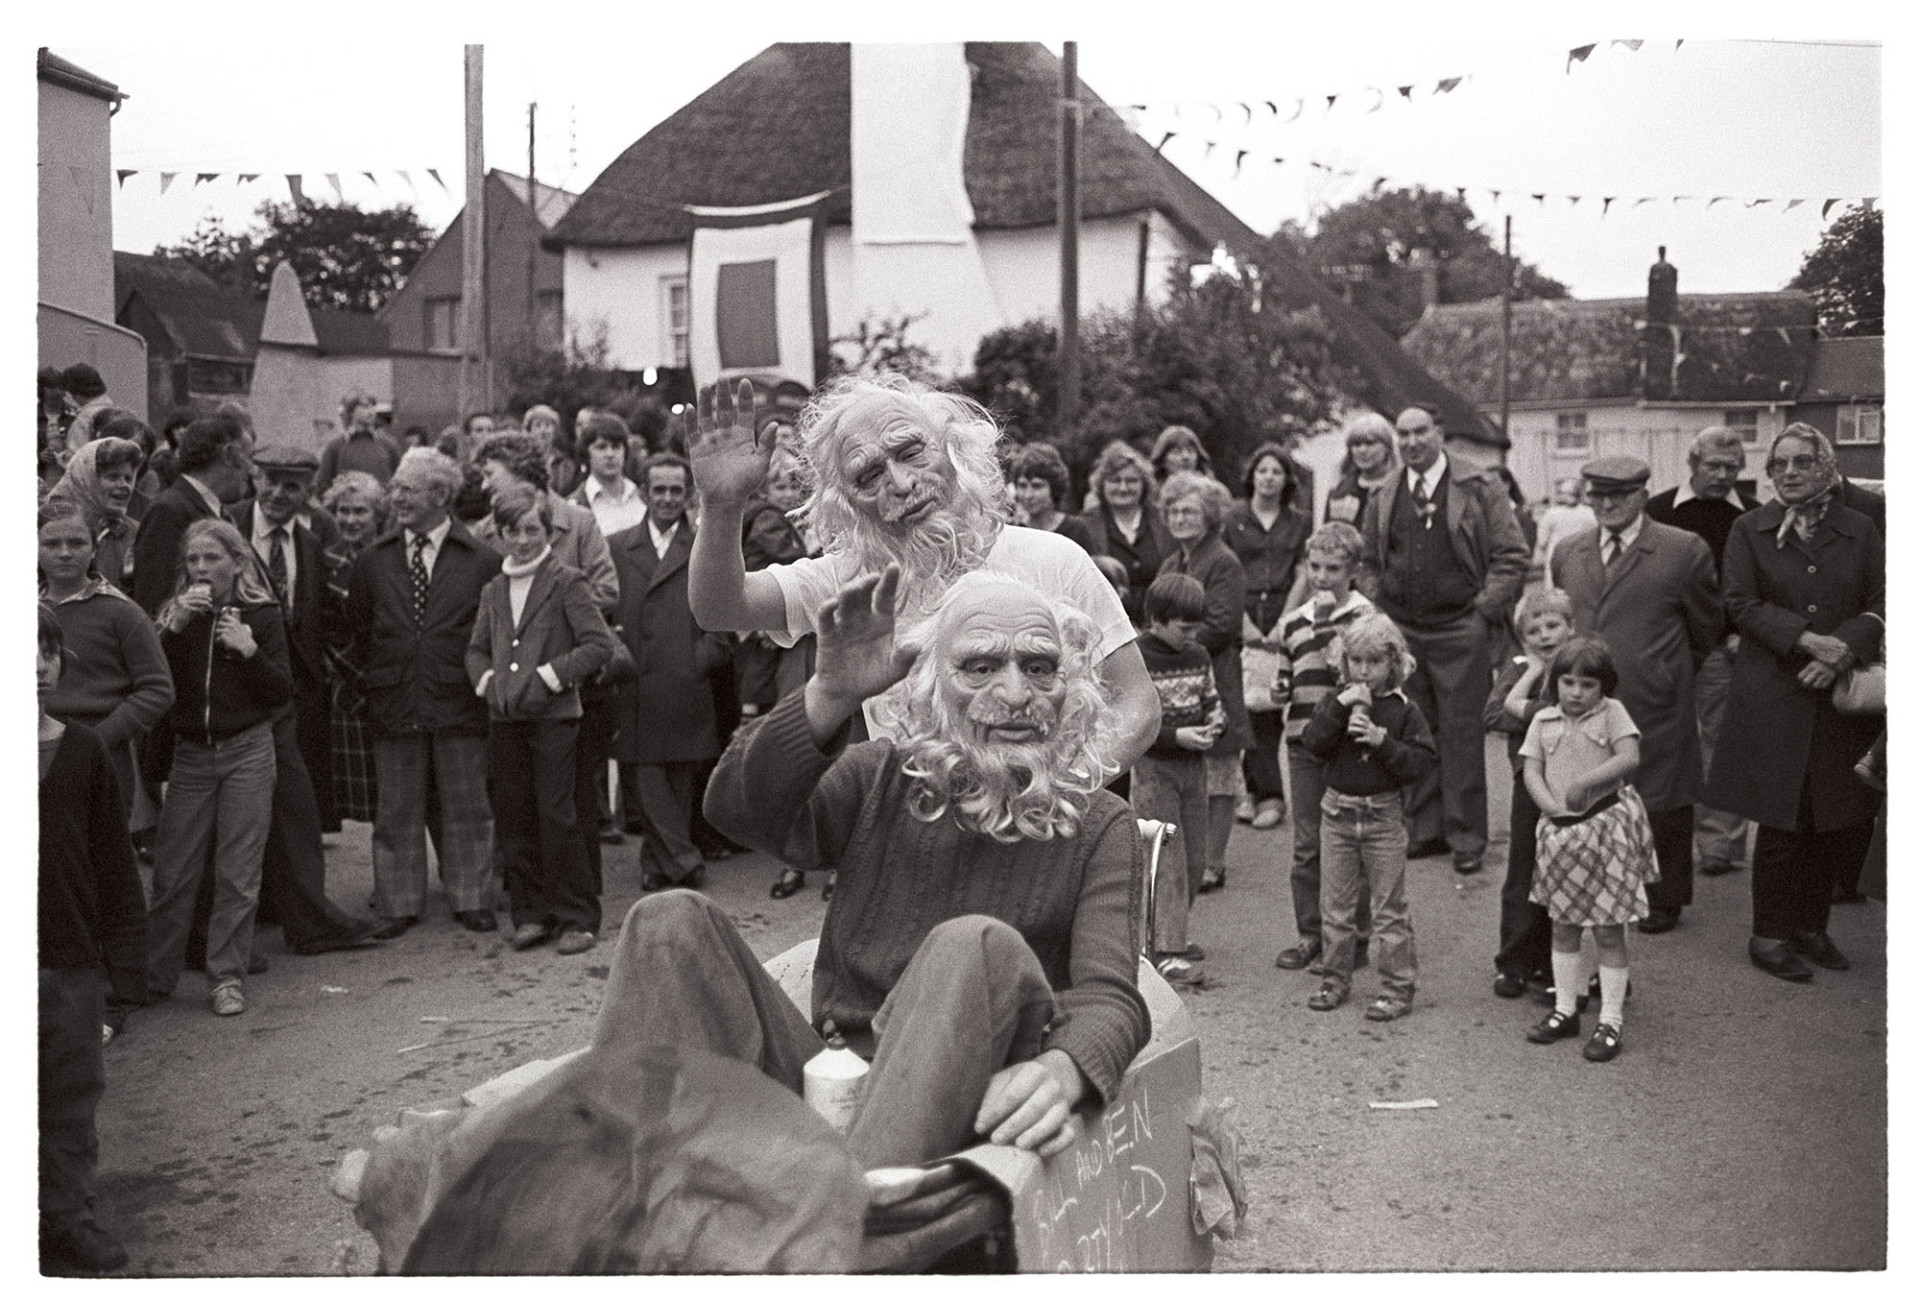 Village Fair, fancy dress, boys in masks in pram. 
[Two boys in masks, one in a pram, in a street  at Winkleigh Fair, with a crowd of people watching them, and cottages and bunting in the background.]